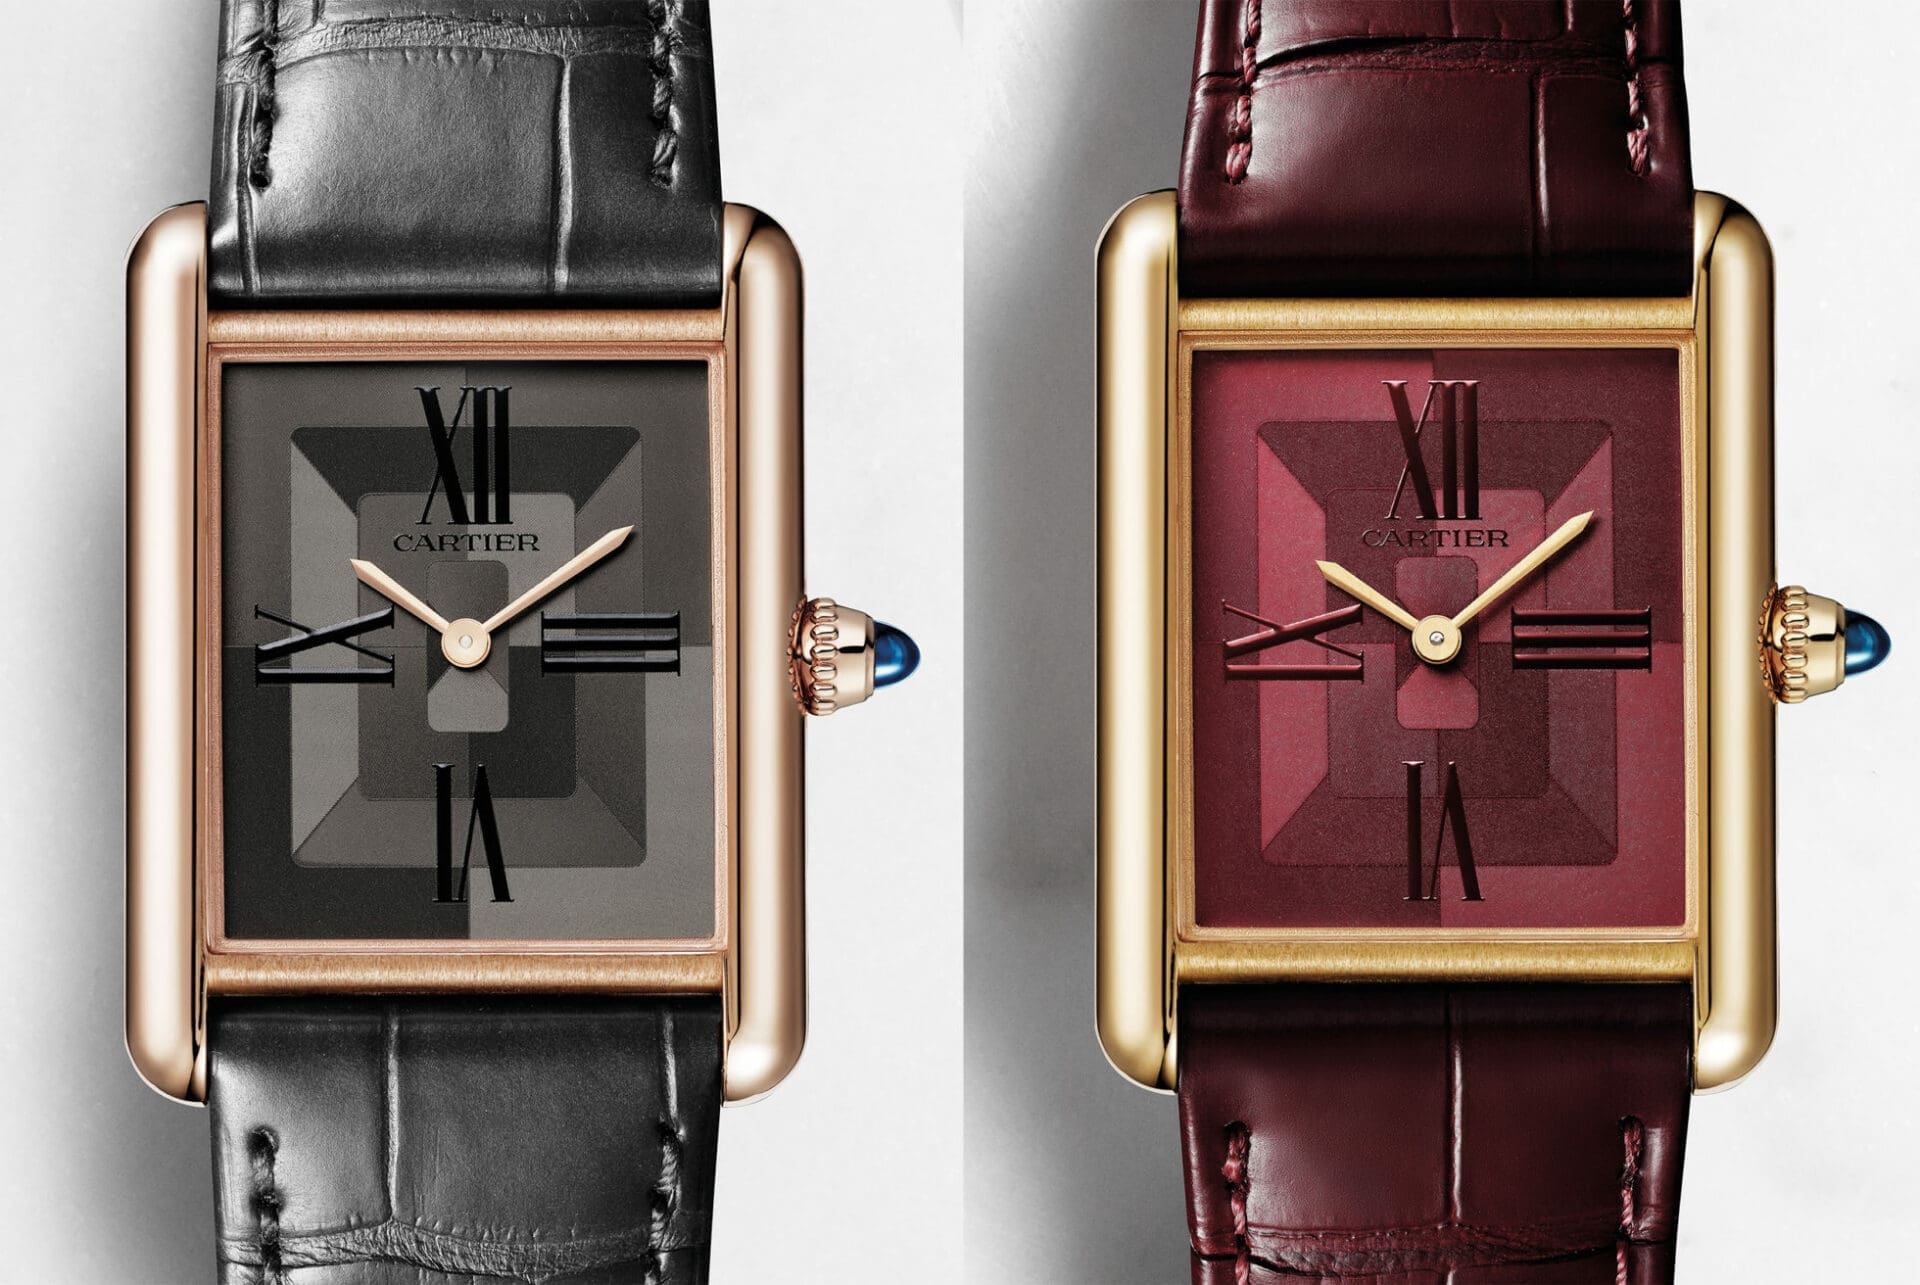 New Cartier watches that defy the laws of gravity